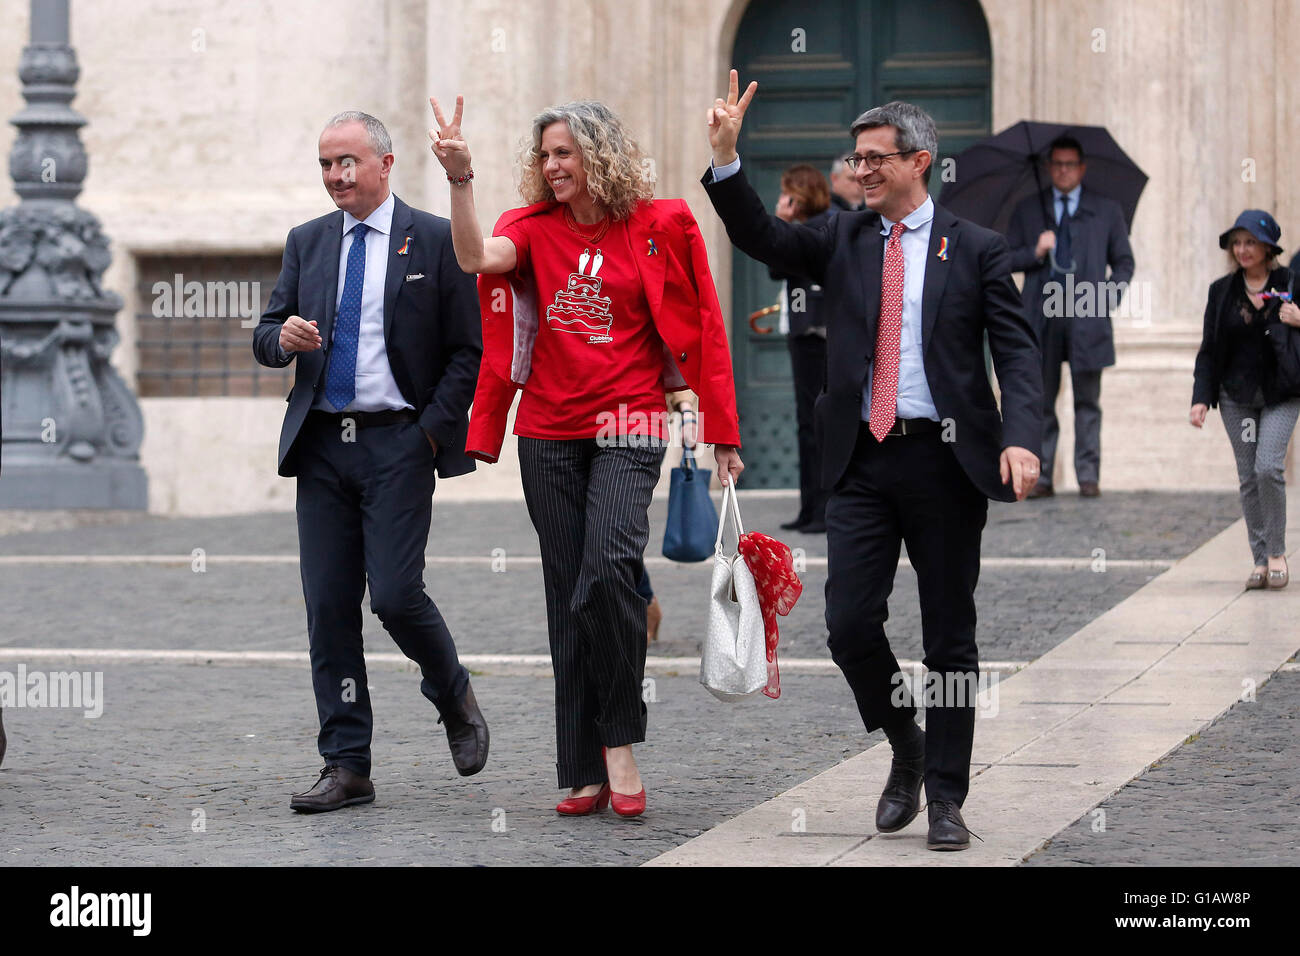 Rome, Italy. 11th May, 2016. Giuseppe Lumia, Monica Cirinna' and Sergio Lo Giudice getting out the Chamber of Deputies with two fingers up, in sign of victory Rome 11th May 2016. Demonstration for Civil Rights while at the Lower Chamber takes place the final vote for the Civil Unions.  Credit:  Insidefoto/Alamy Live News Stock Photo